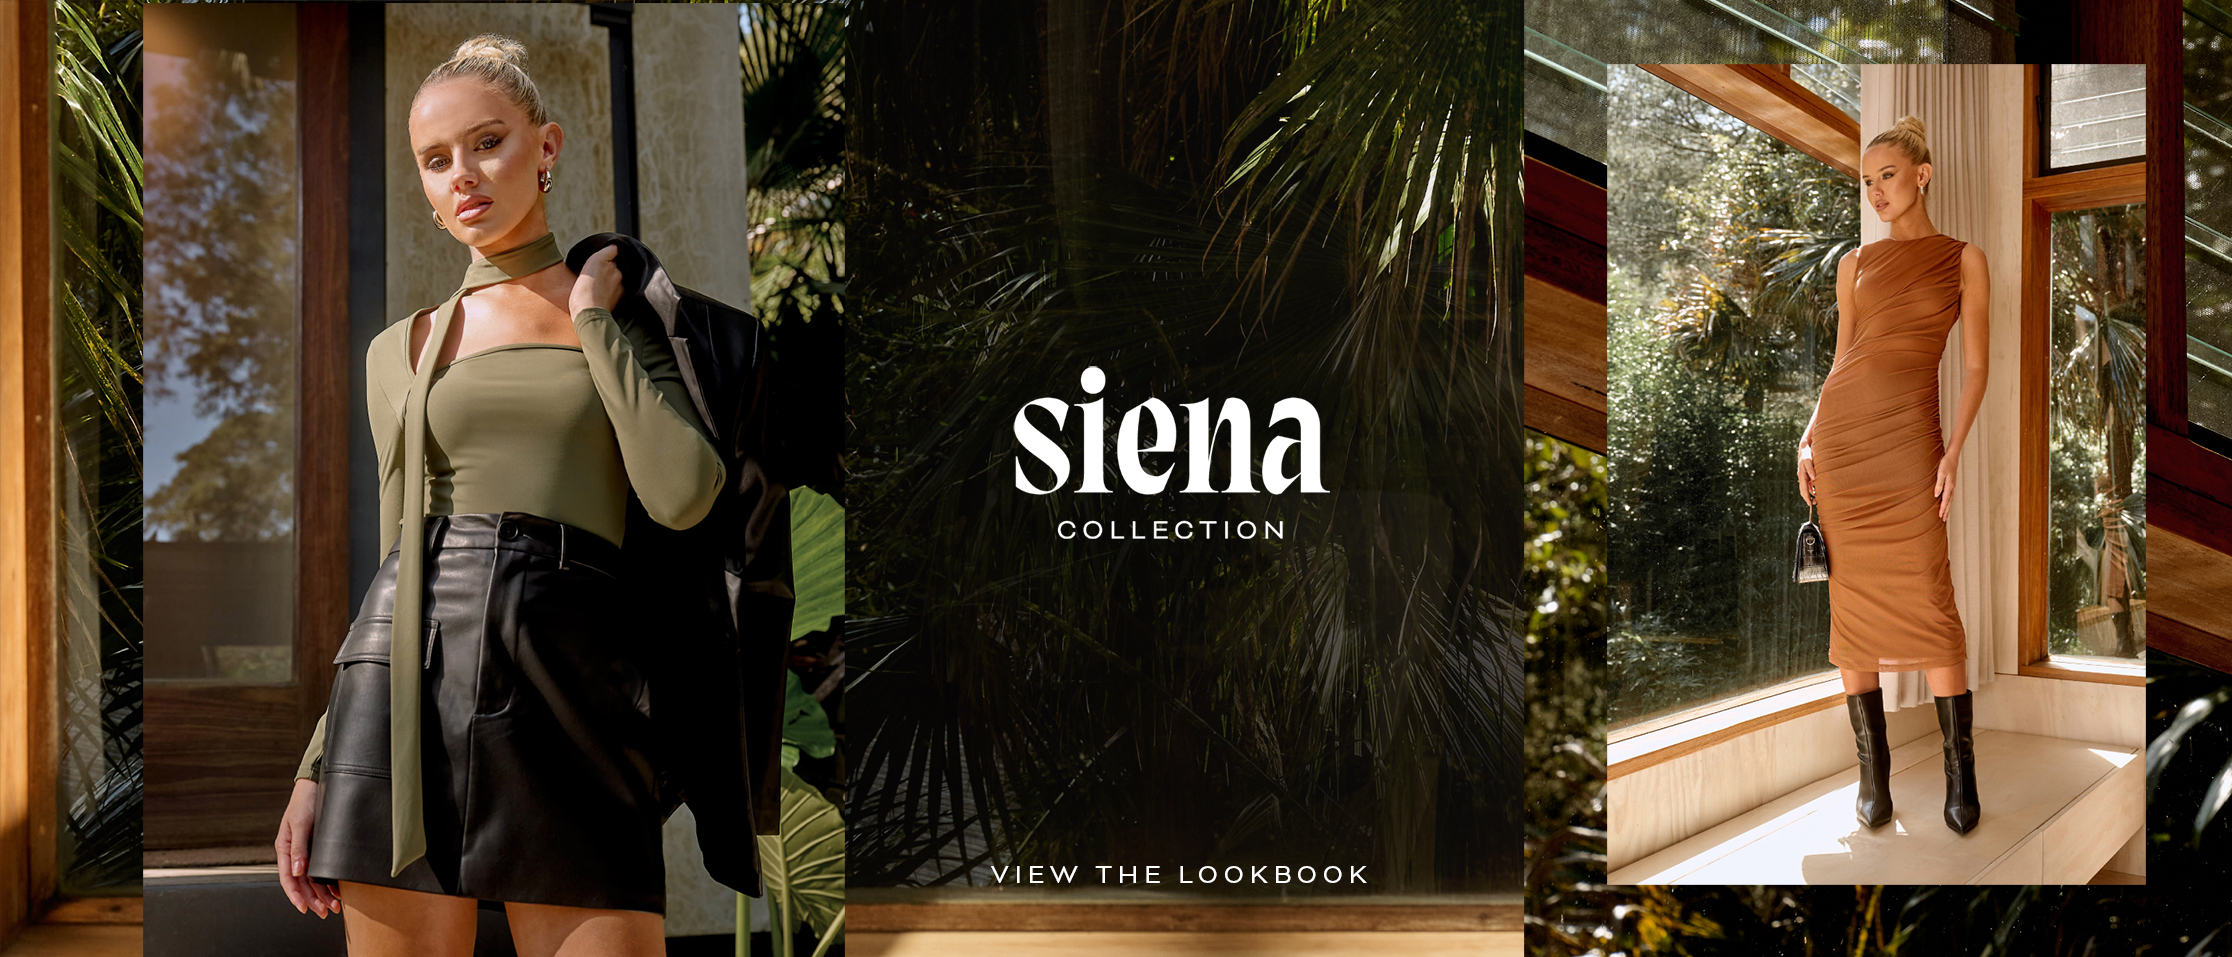 View the Siena Collection